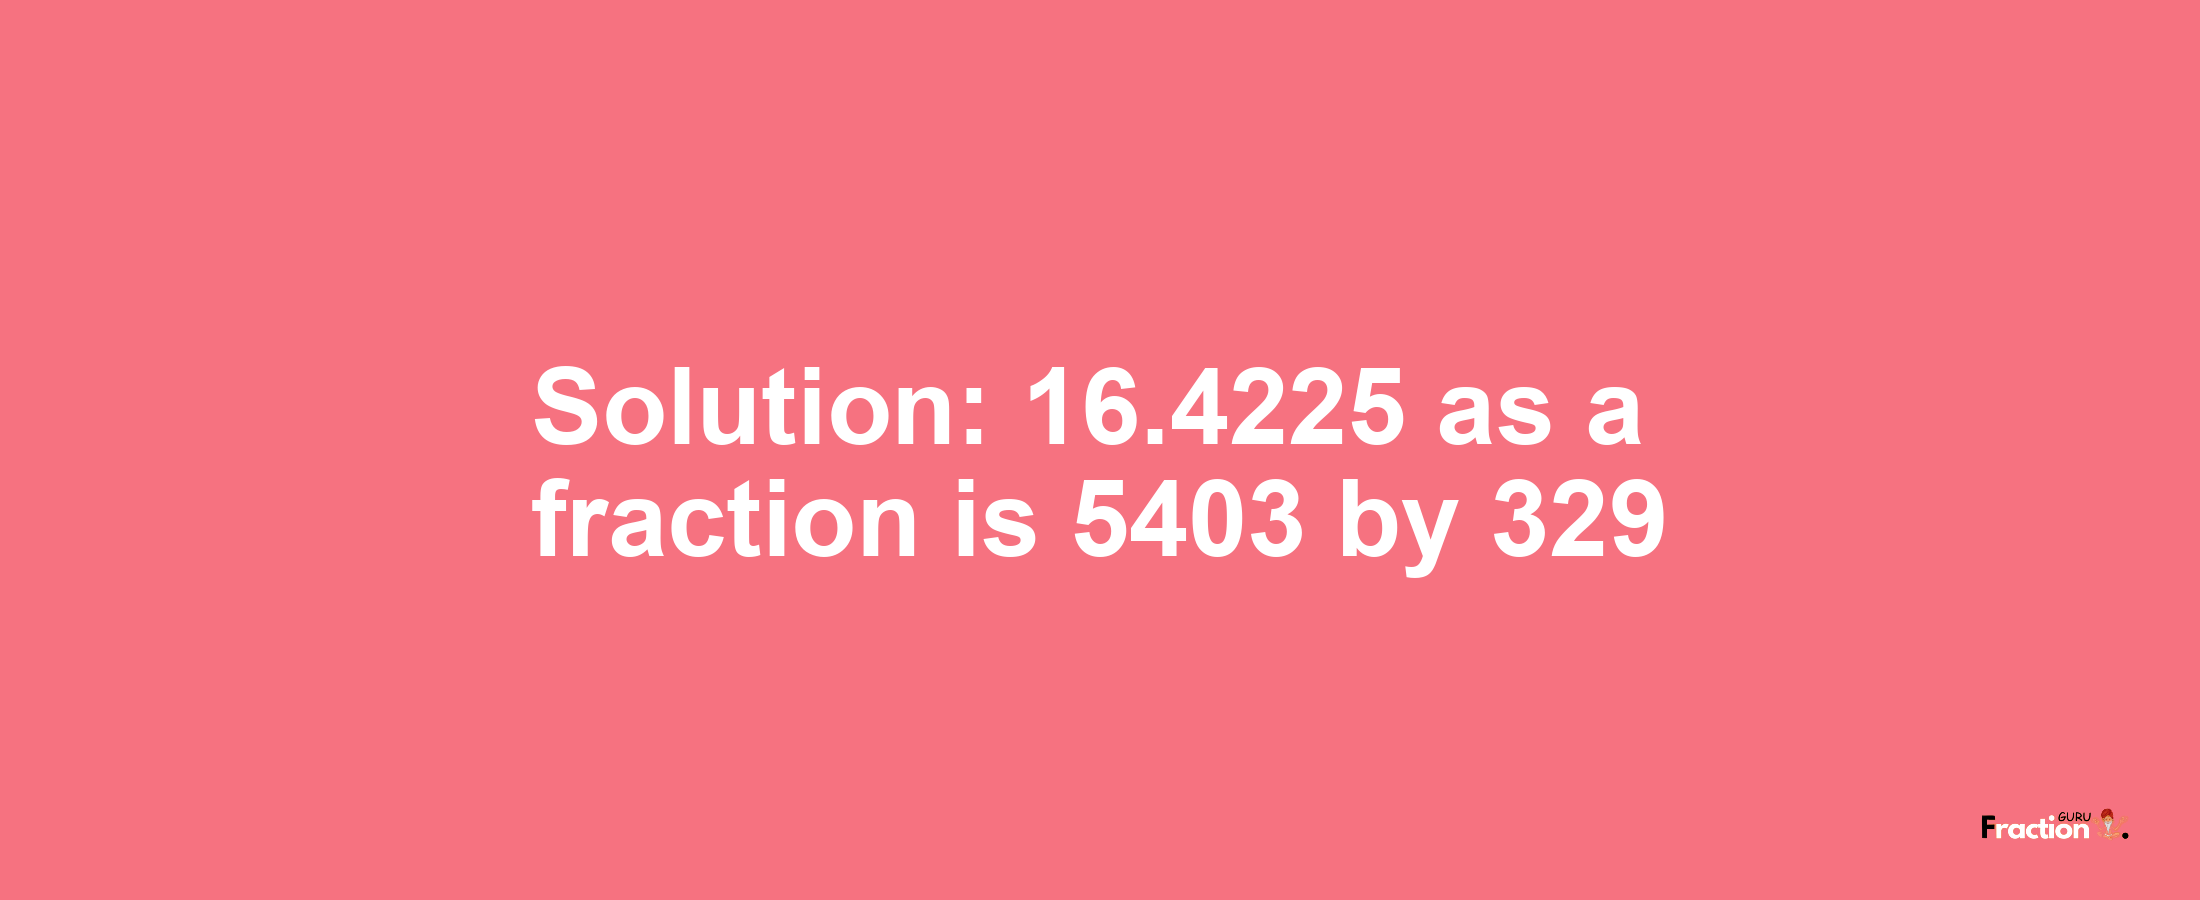 Solution:16.4225 as a fraction is 5403/329